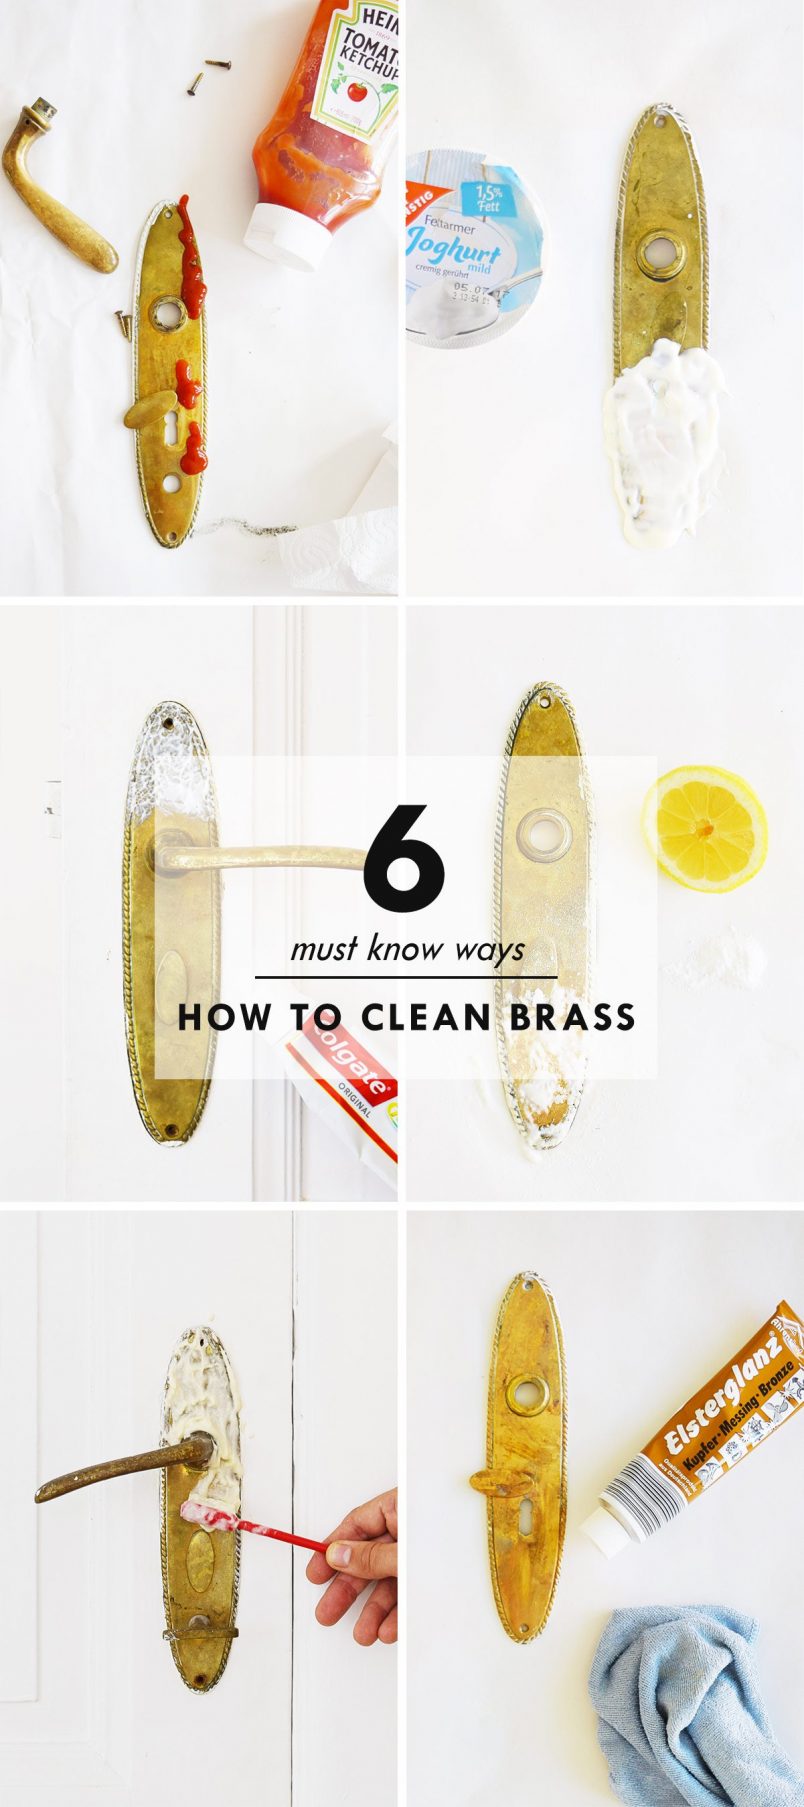 How to Clean Brass with Ketchup